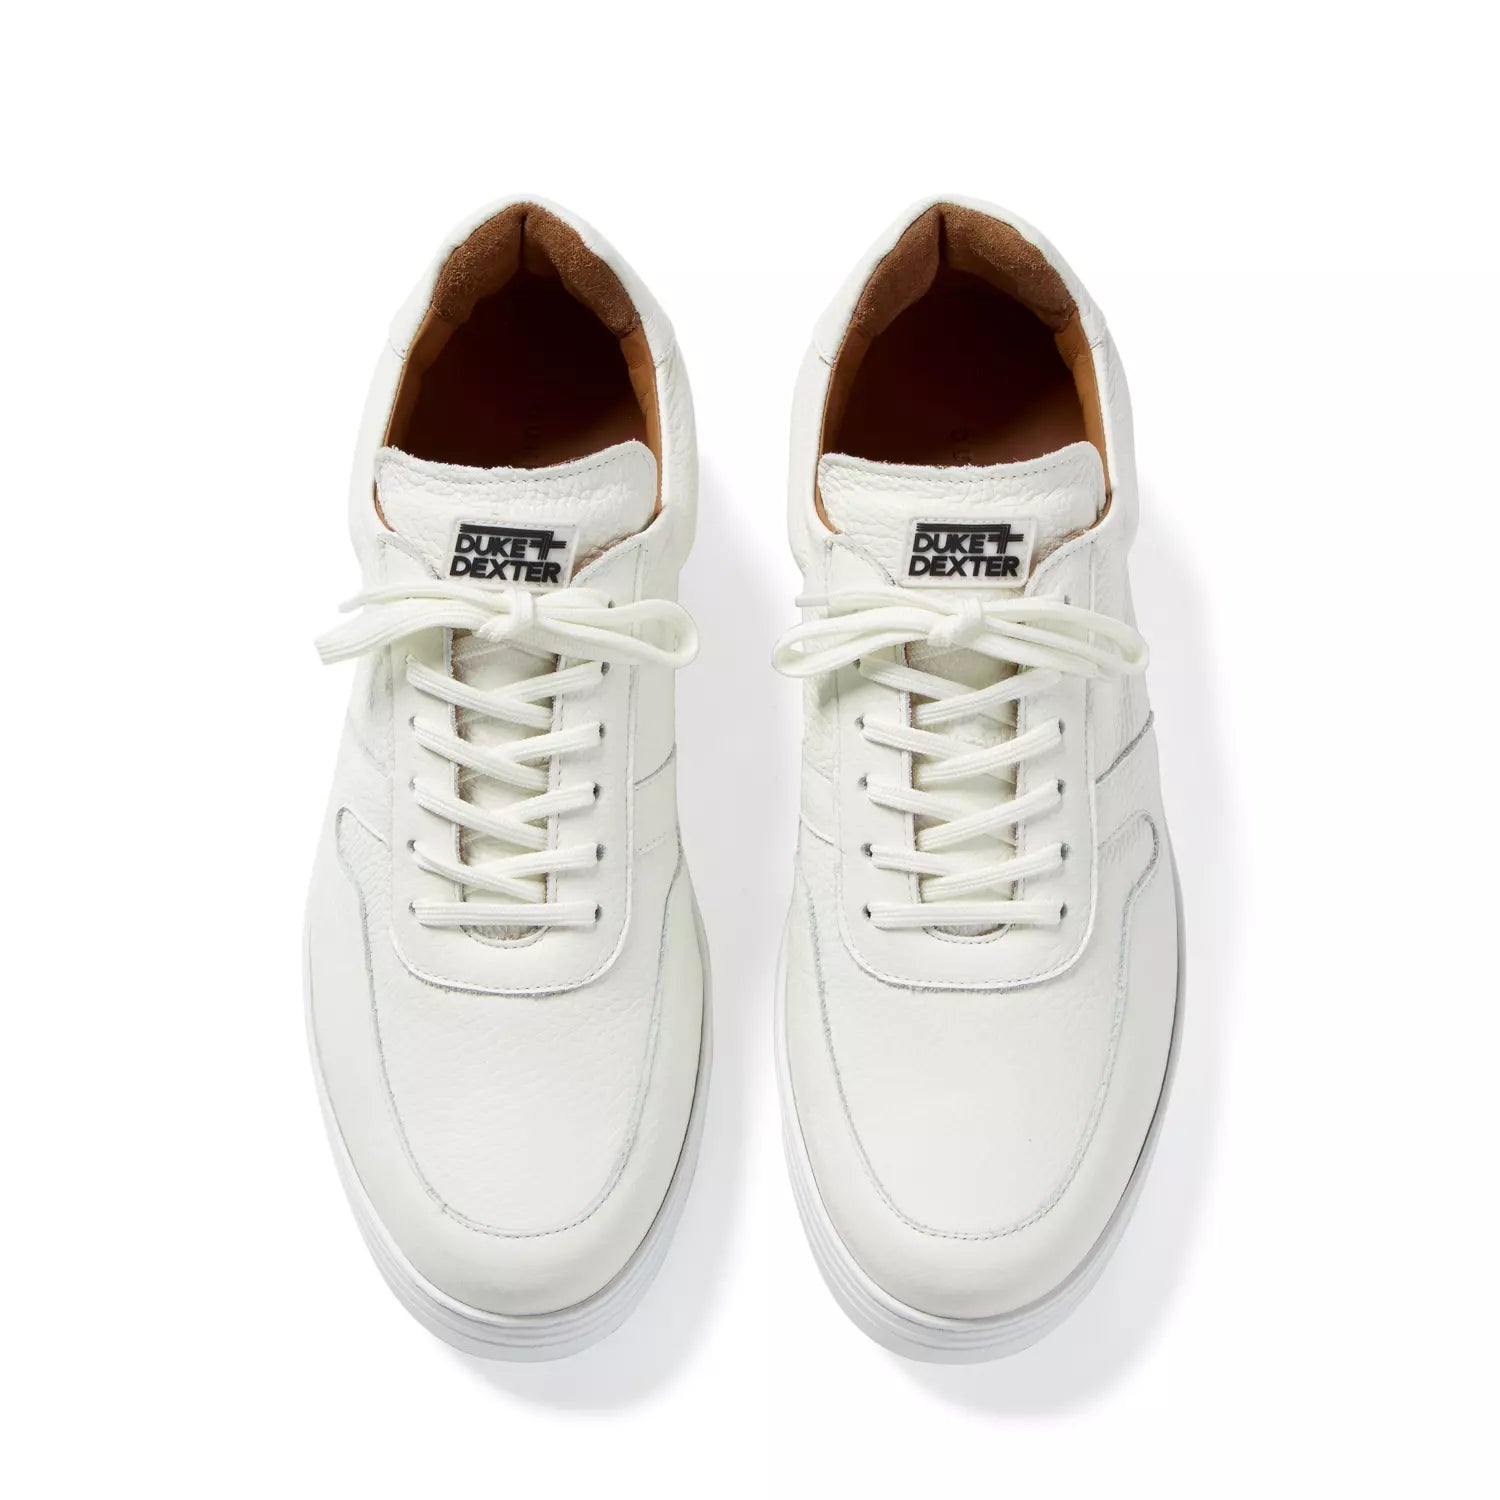 Duke and Dexter Ritchie White leather sneakers for men